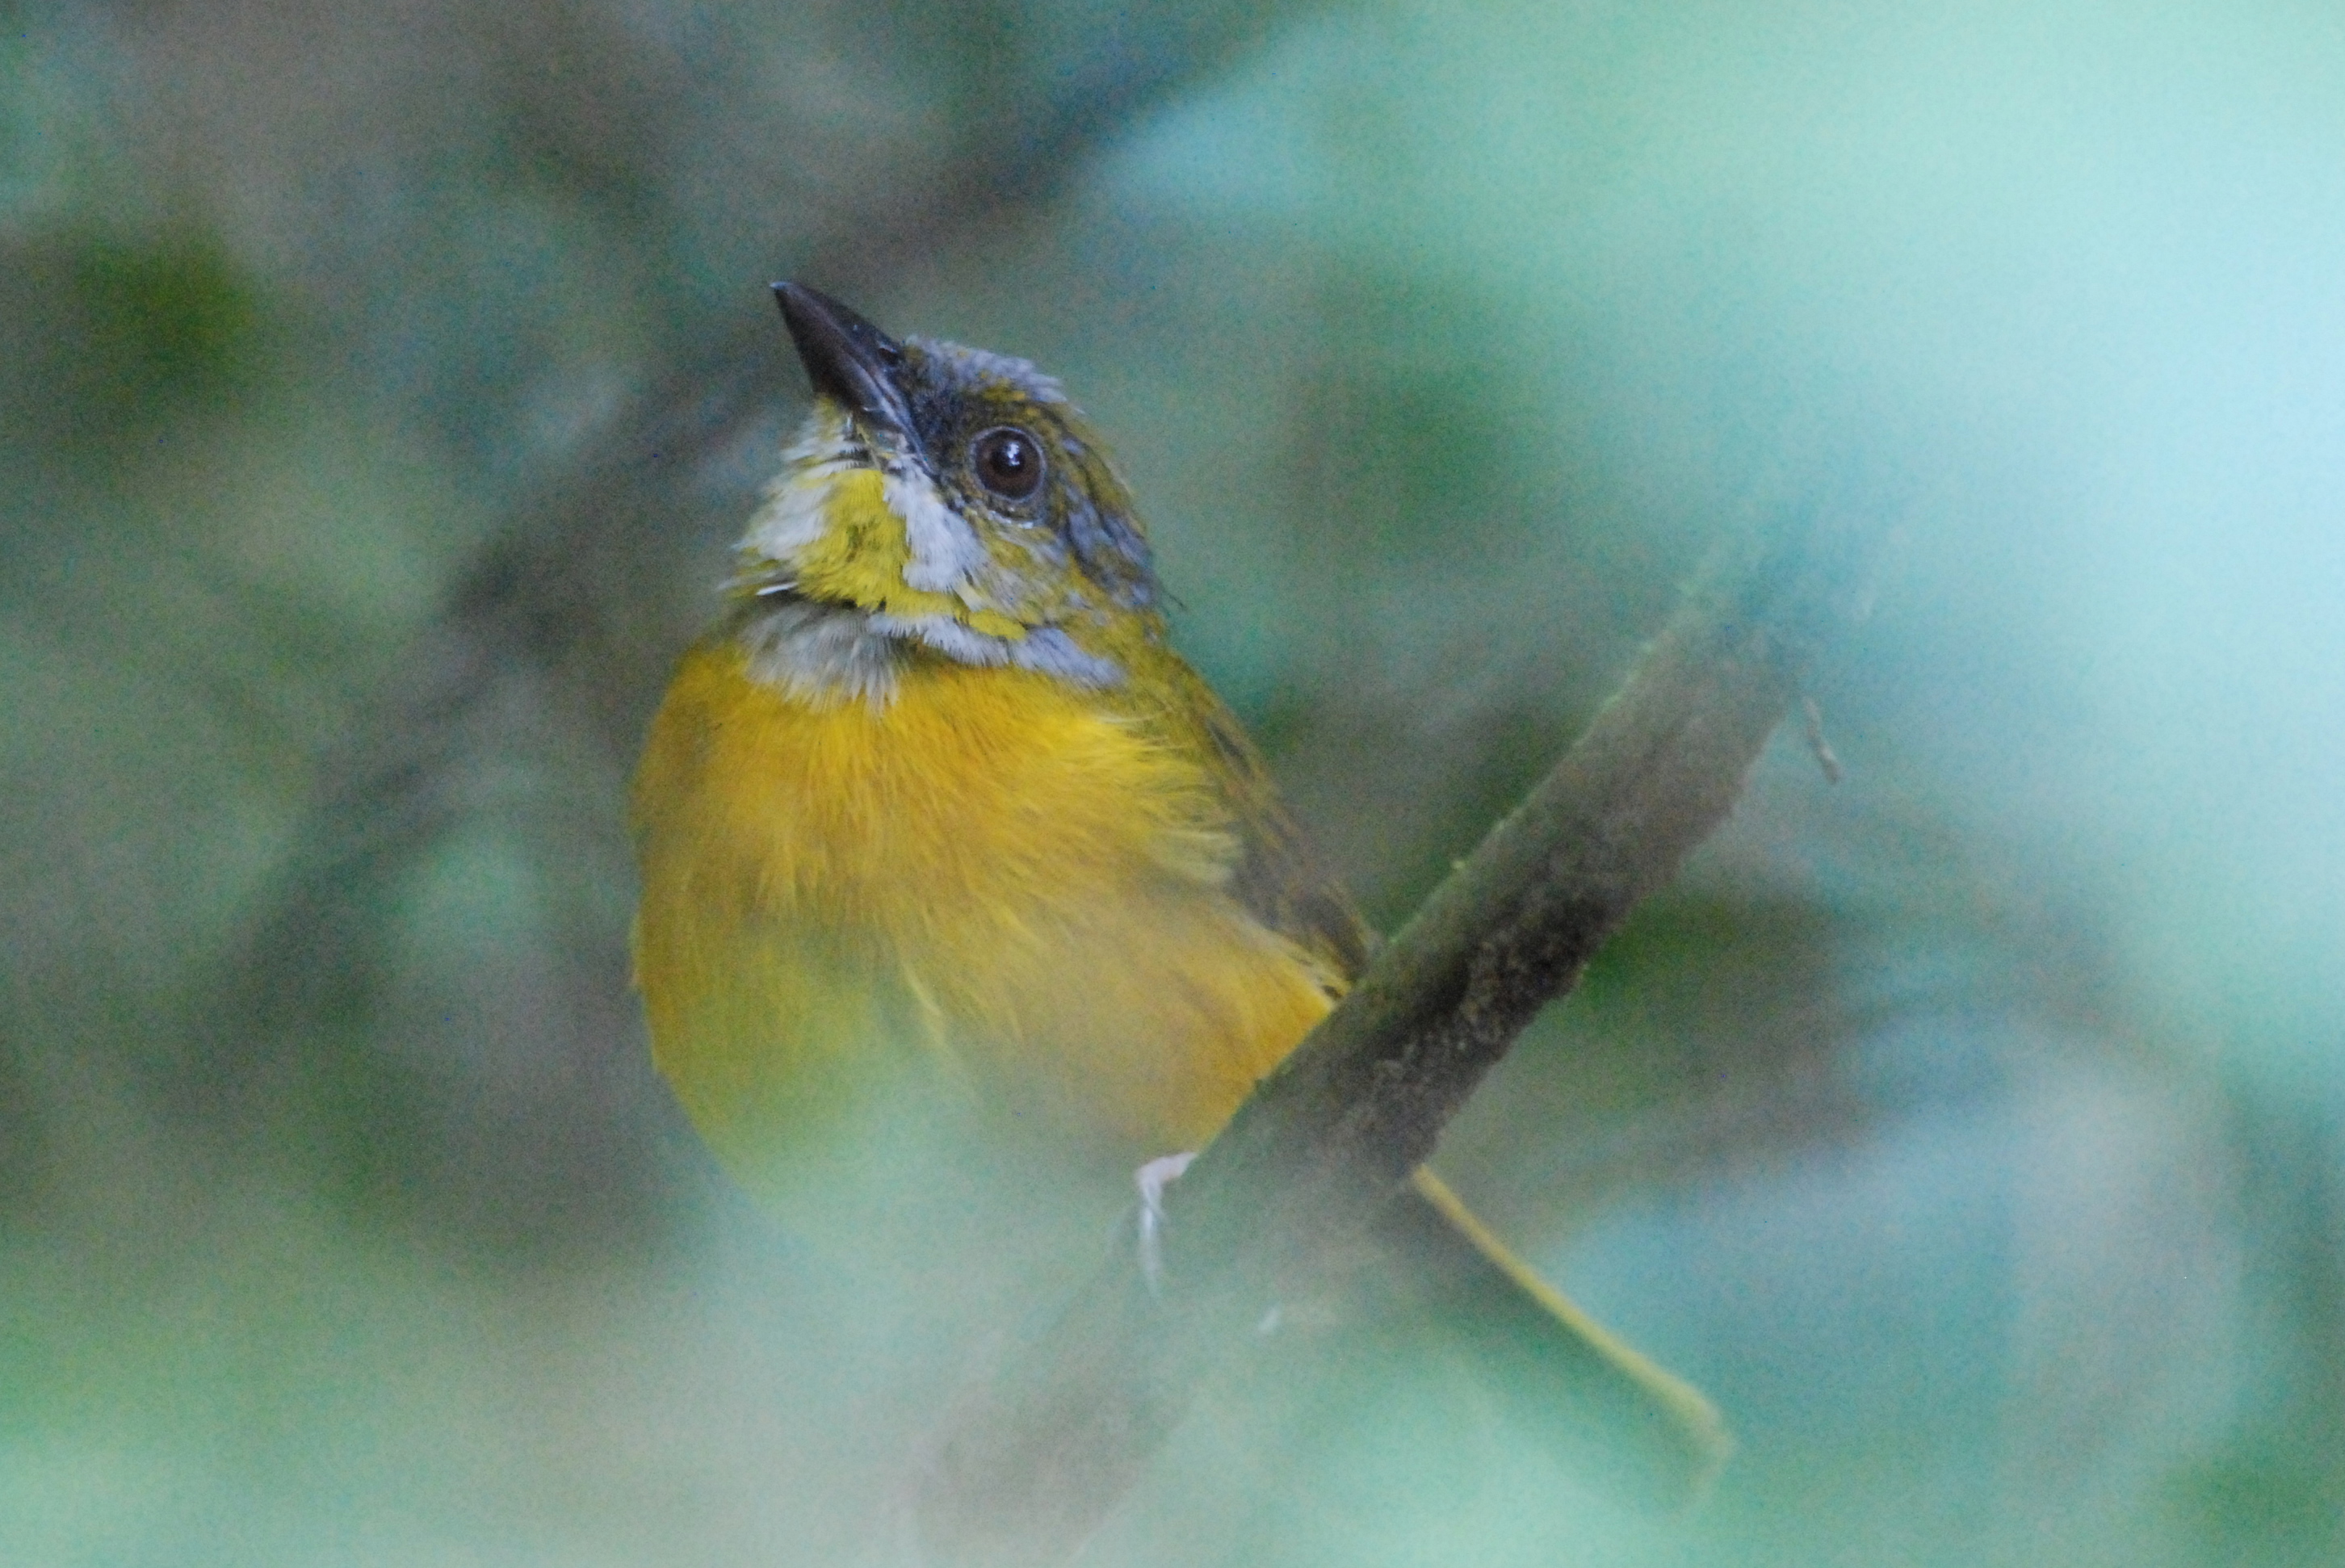 Click picture to see more Gray-headed Tanagers.